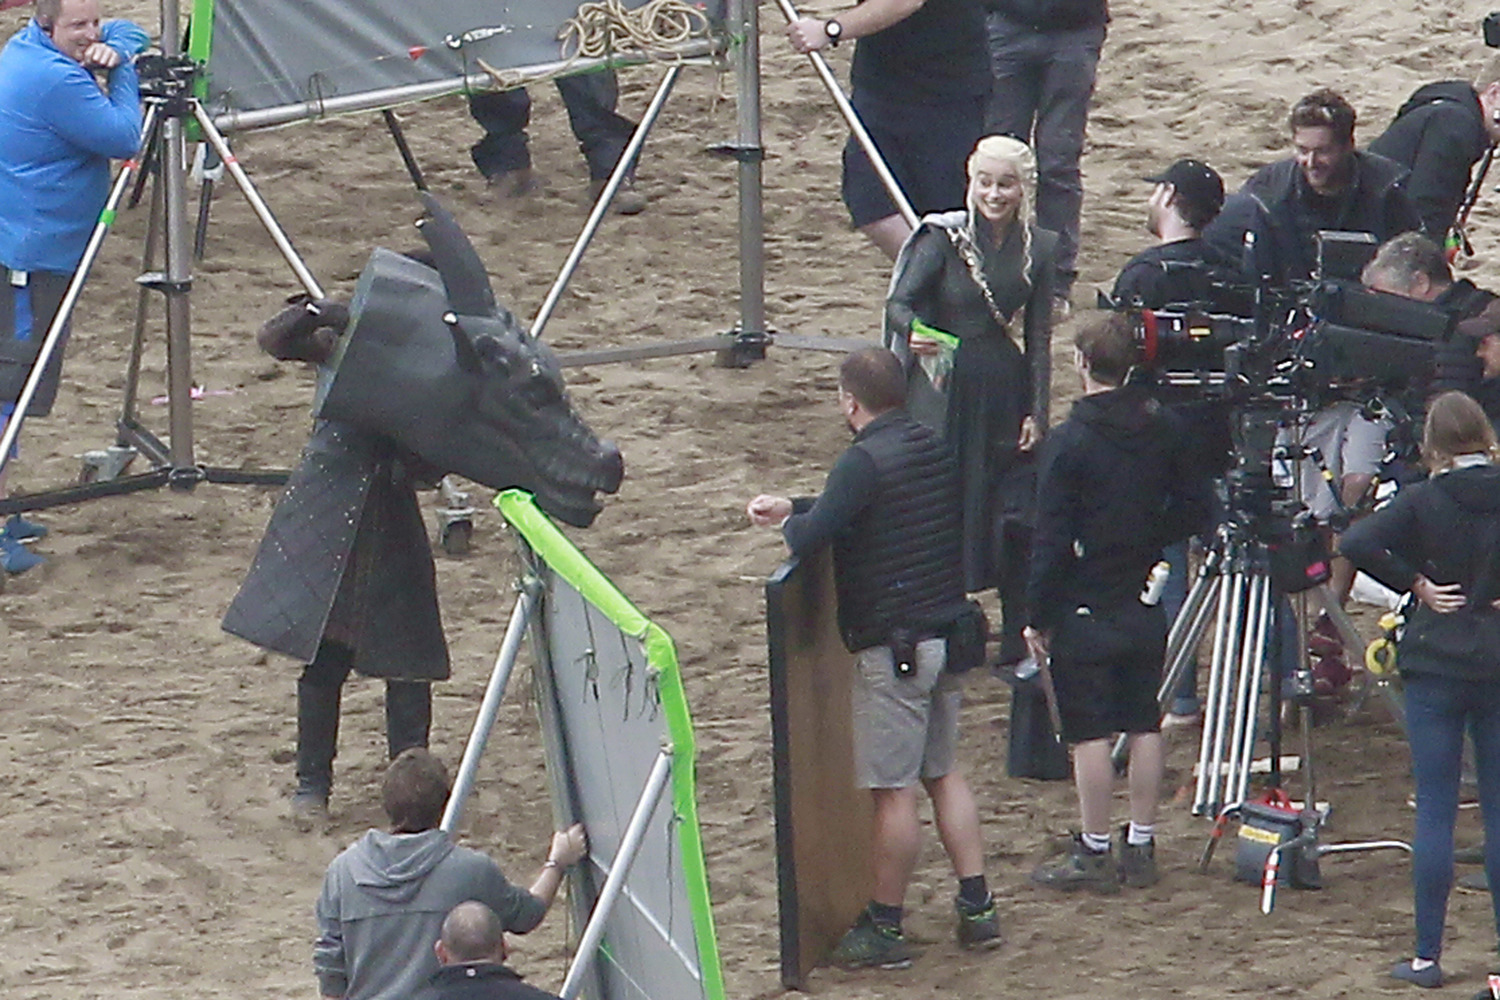 Emilia Clarke and Kit Harington film scenes for season 7 of Game of Thrones on a beach in northern Spain.